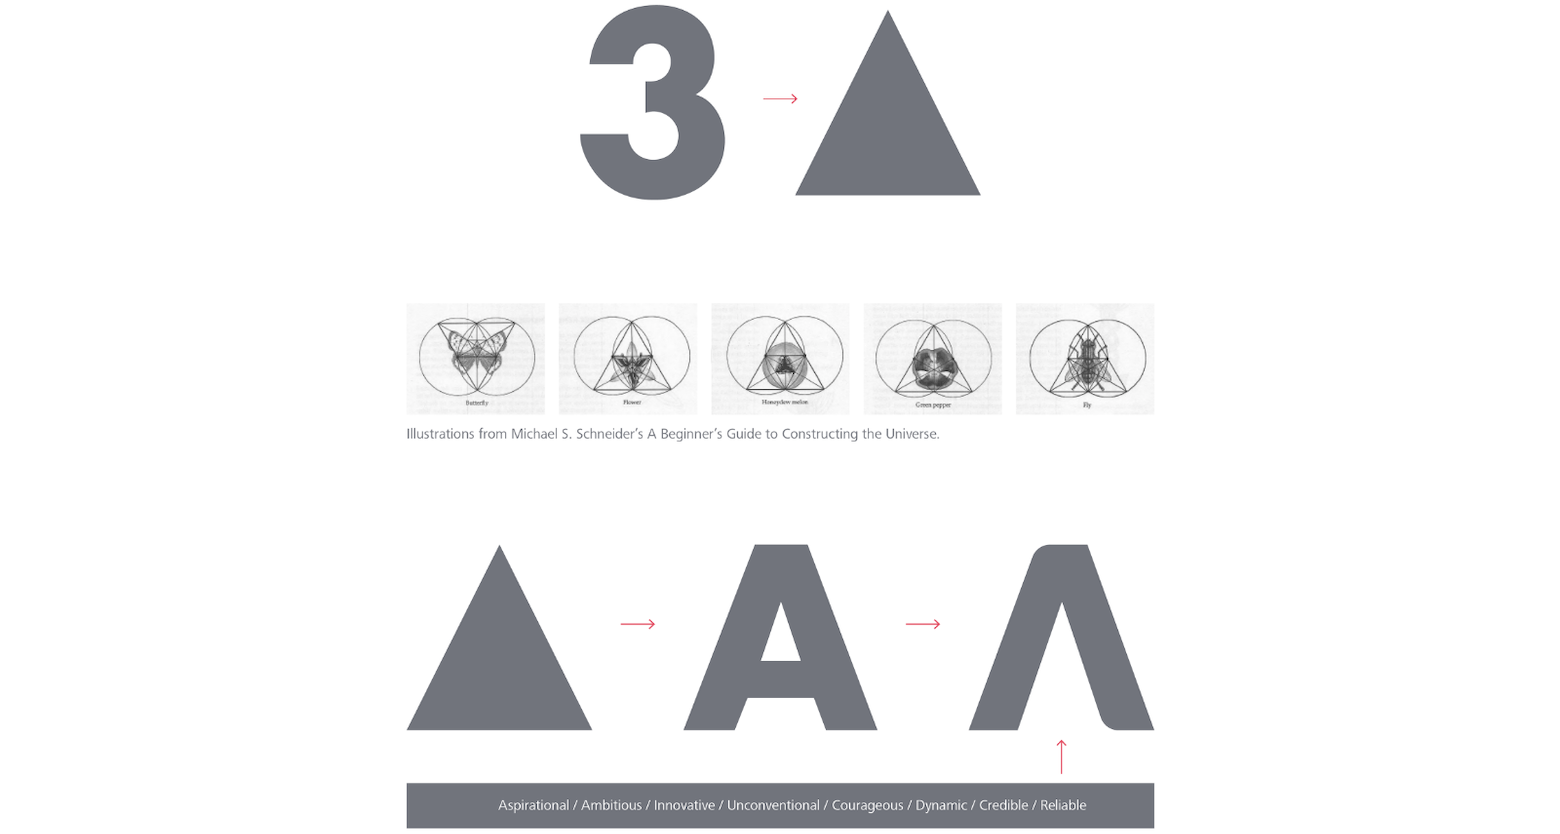 This diagram shows the journey of the number three to the final form of the "A" used in the IPAA logo. The numeral is at the top left of the diagram, and an arrow at its right points to a triangle. Below them are a line of illustrations of triangular forms of nature, including insects and flowers. And below that, on the lower left, is a triangle with an arrow at its right that points to a typical letter A, and another arrow points the final triangular A that is used in the logo.